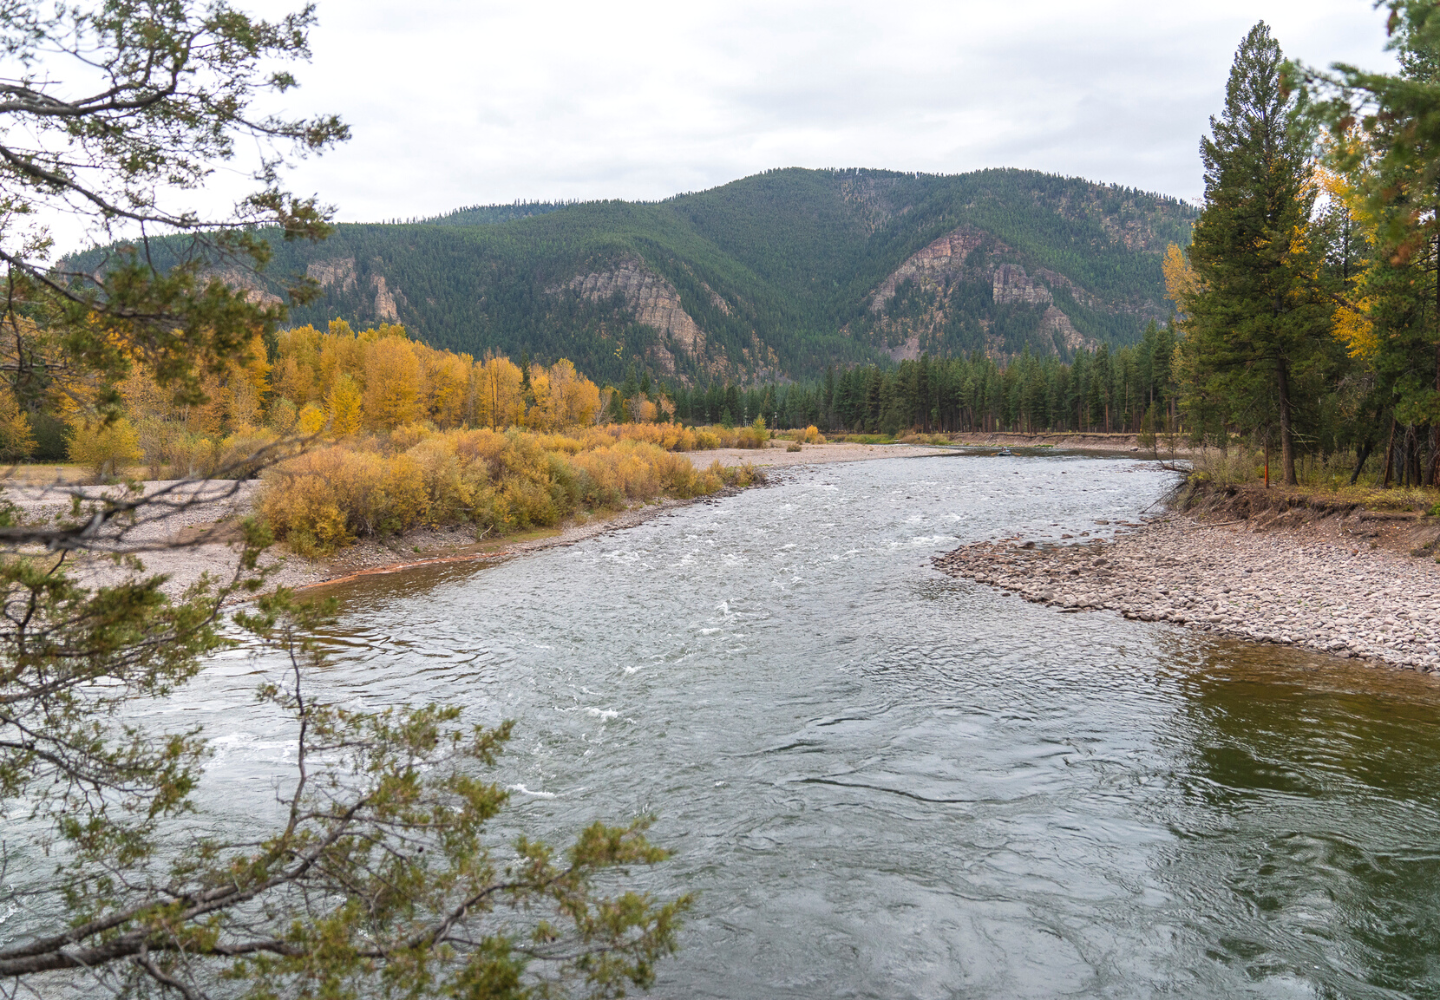 October fly fishing on the Blackfoot River